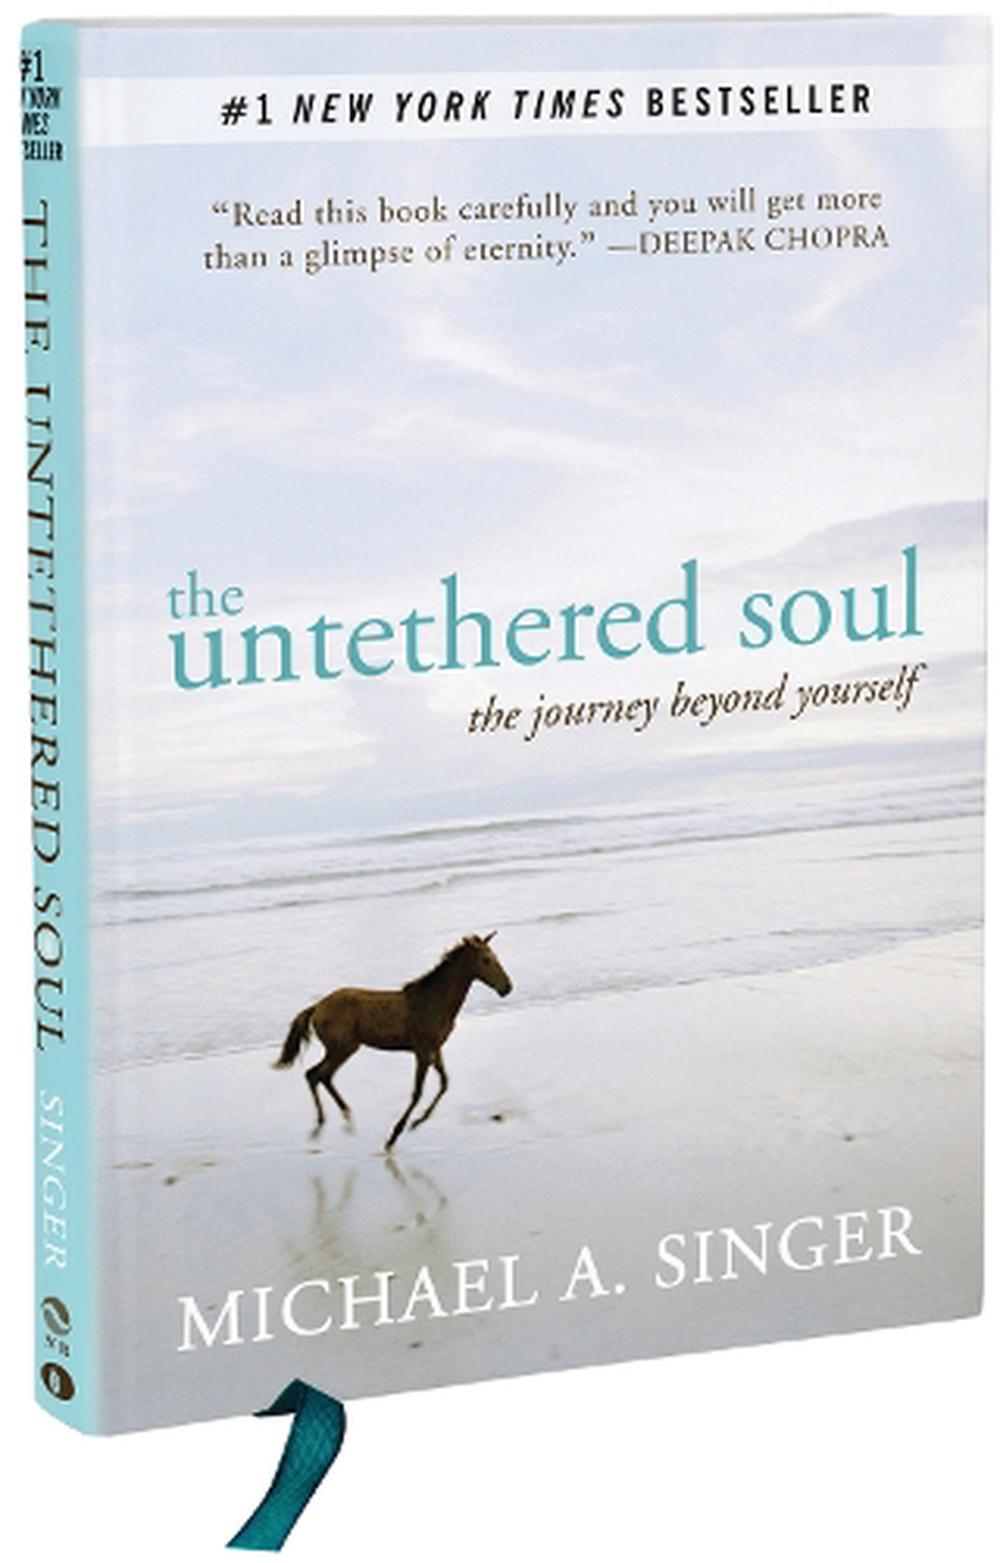 the untethered soul audiobook free download